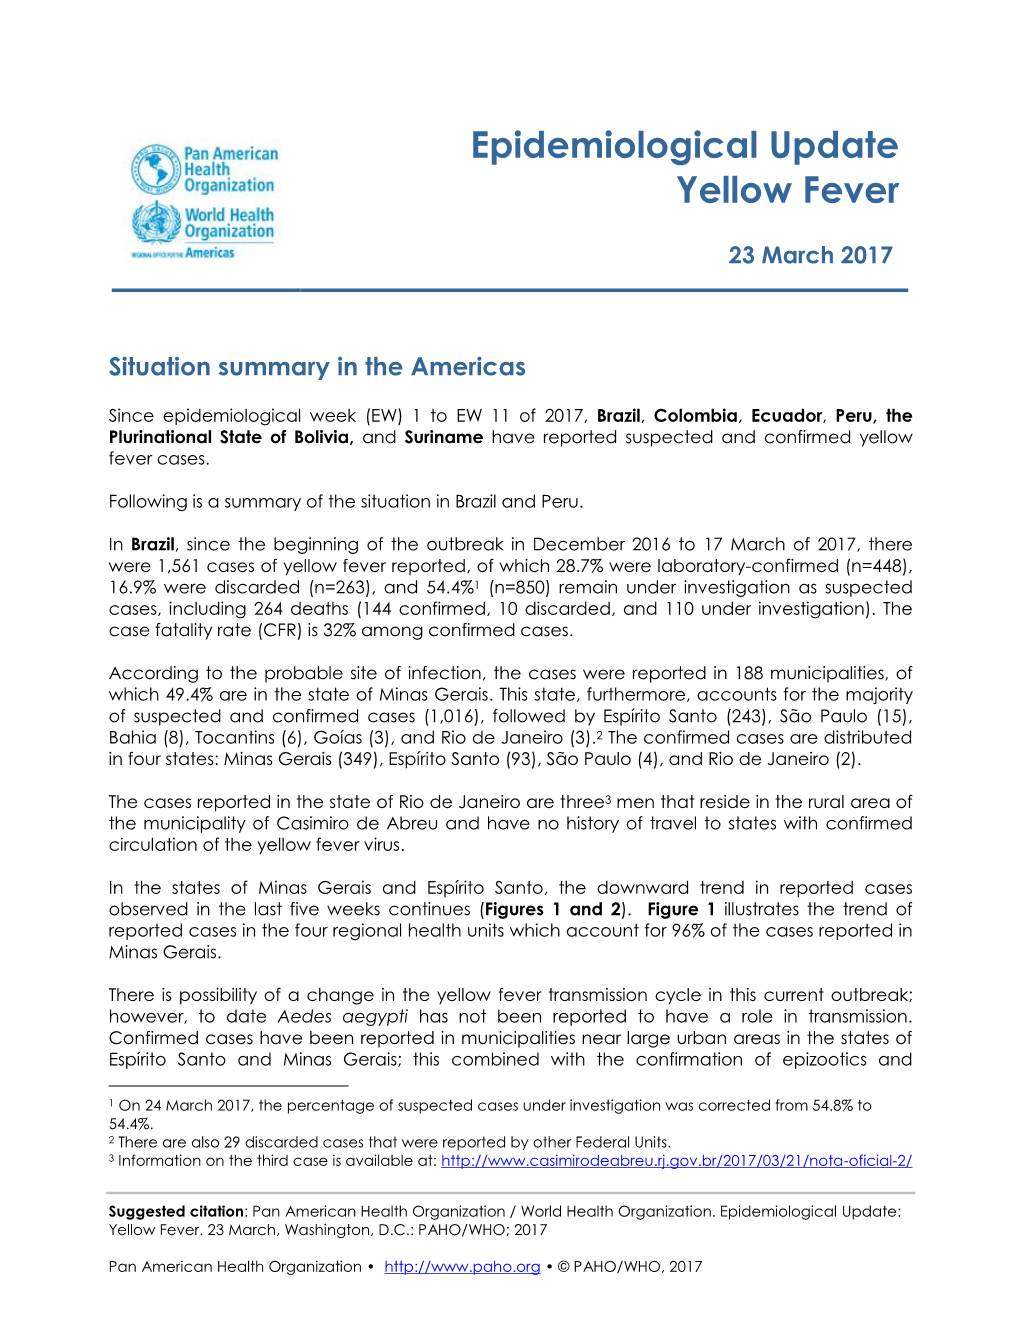 23 March 2017: Yellow Fever – Epidemiological Update